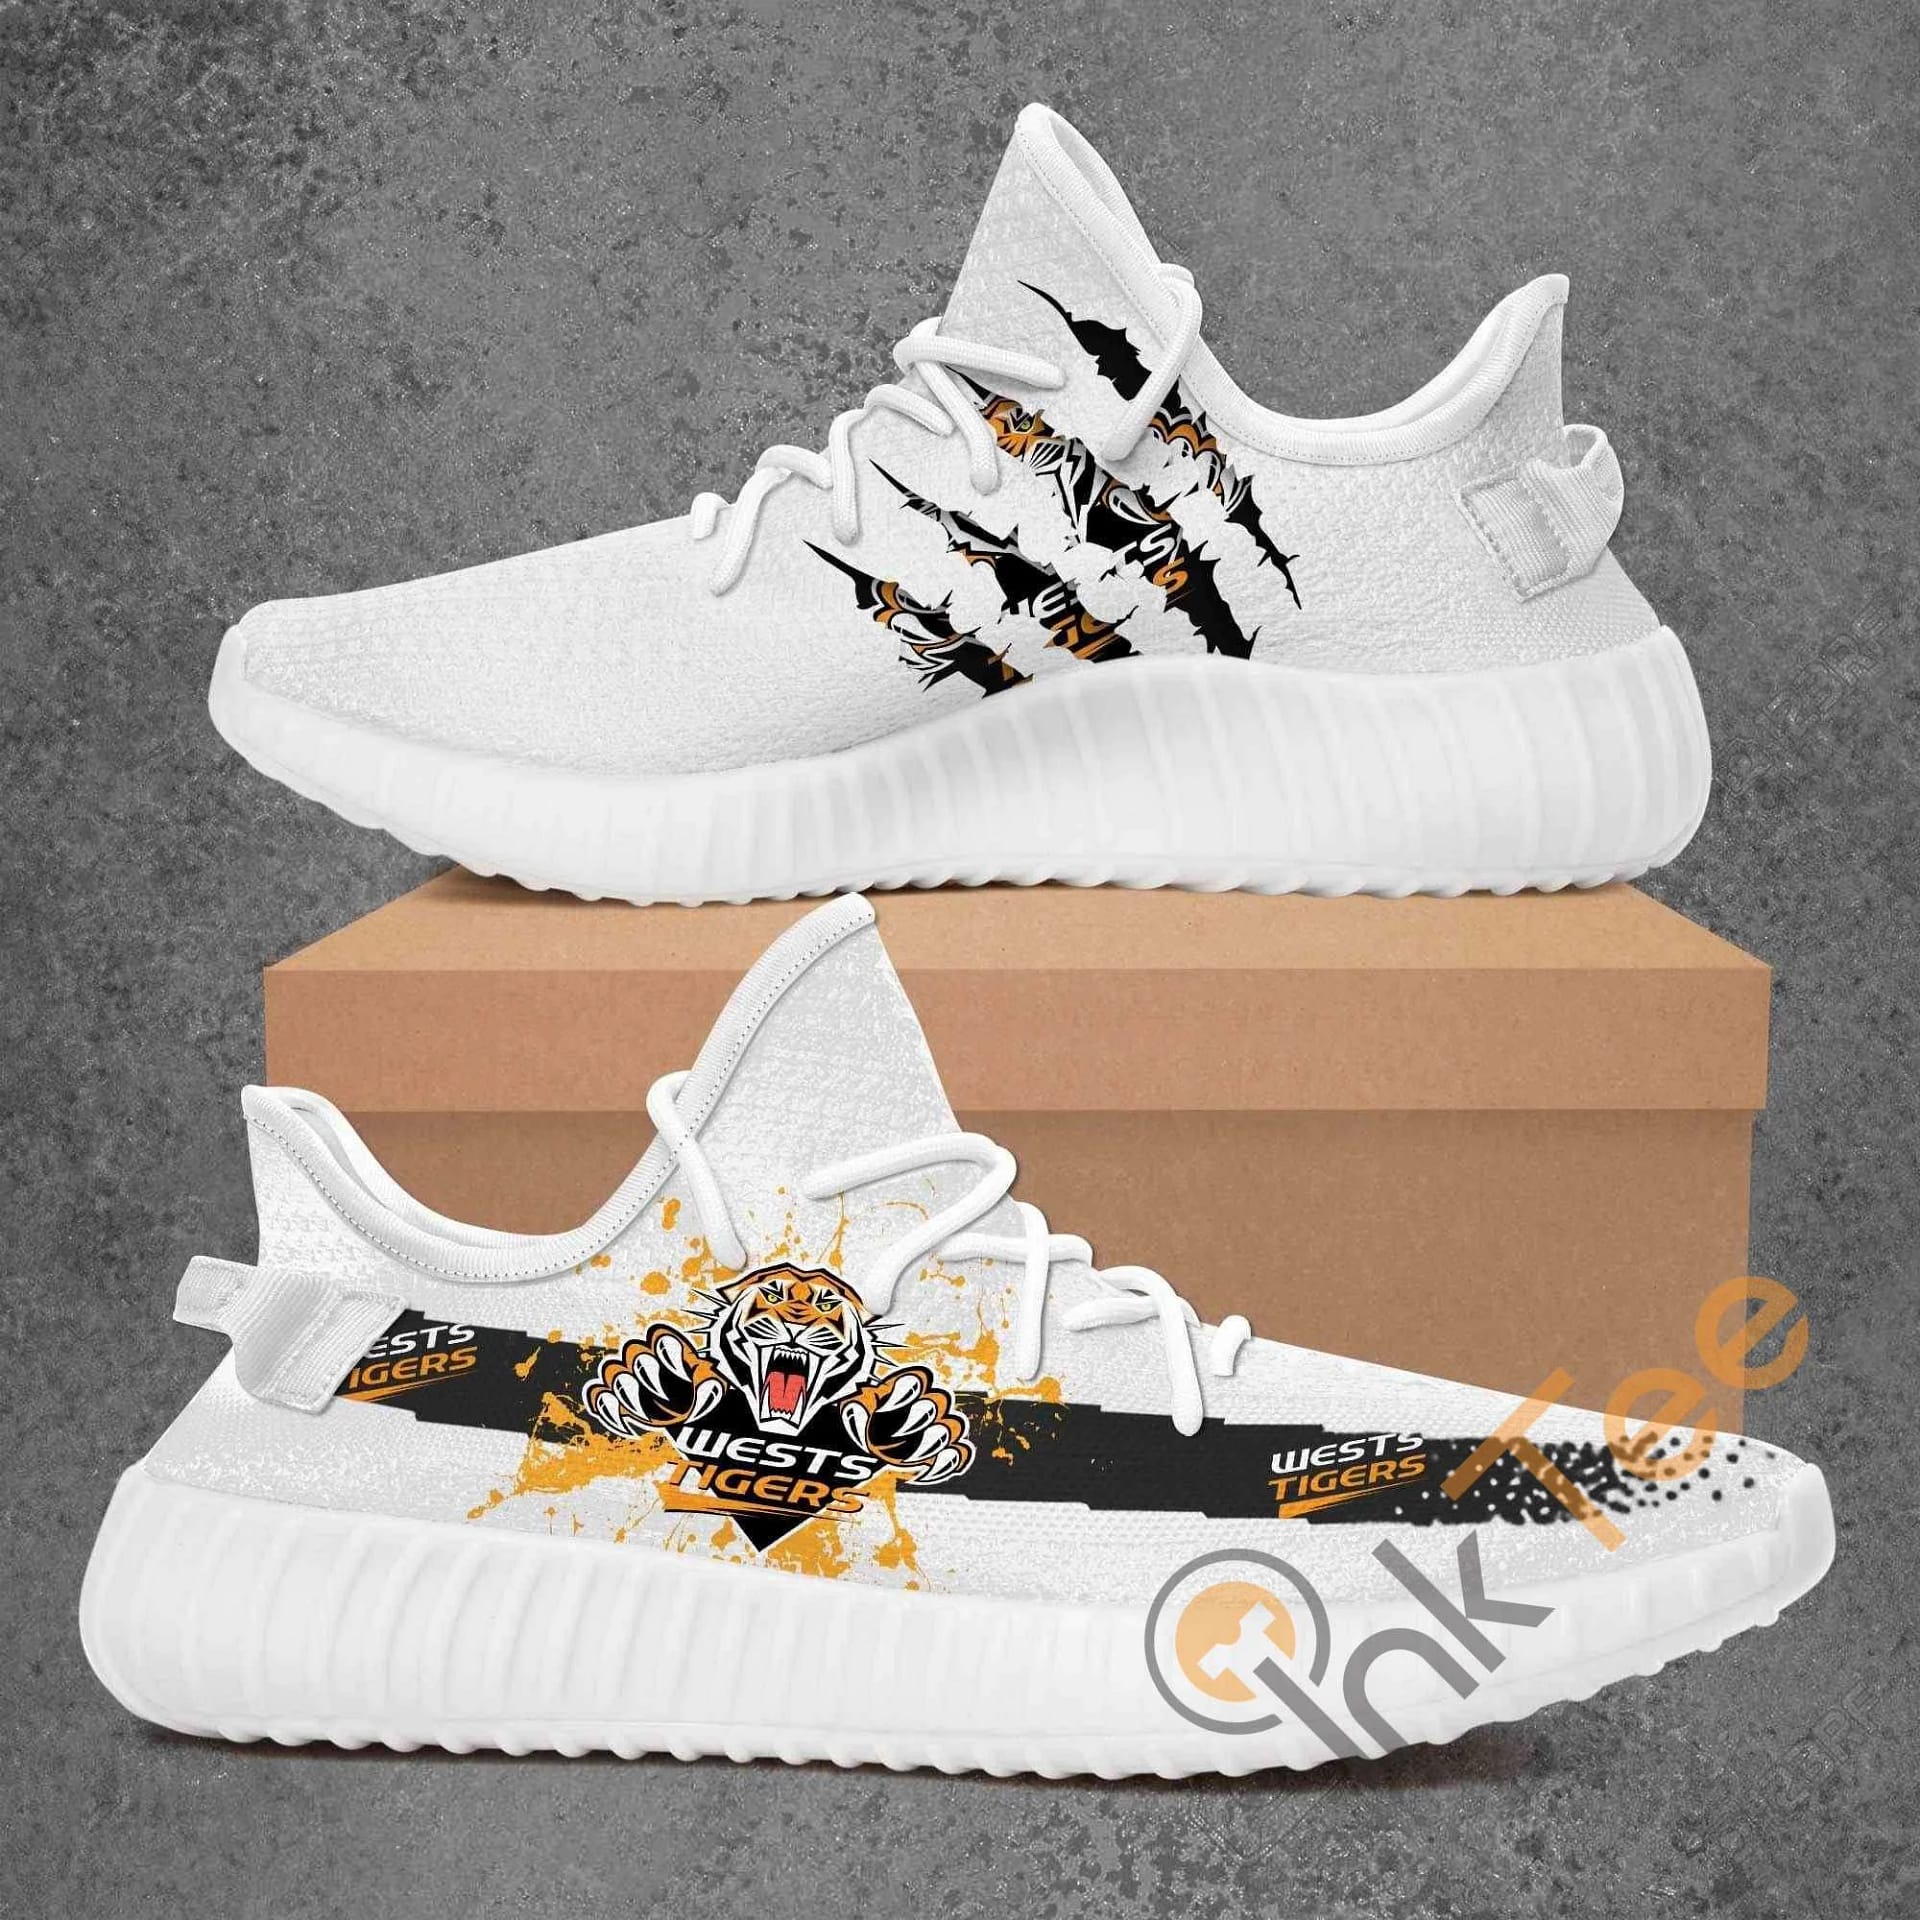 Wests Tigers Adidas Amazon Best Selling Yeezy Boost